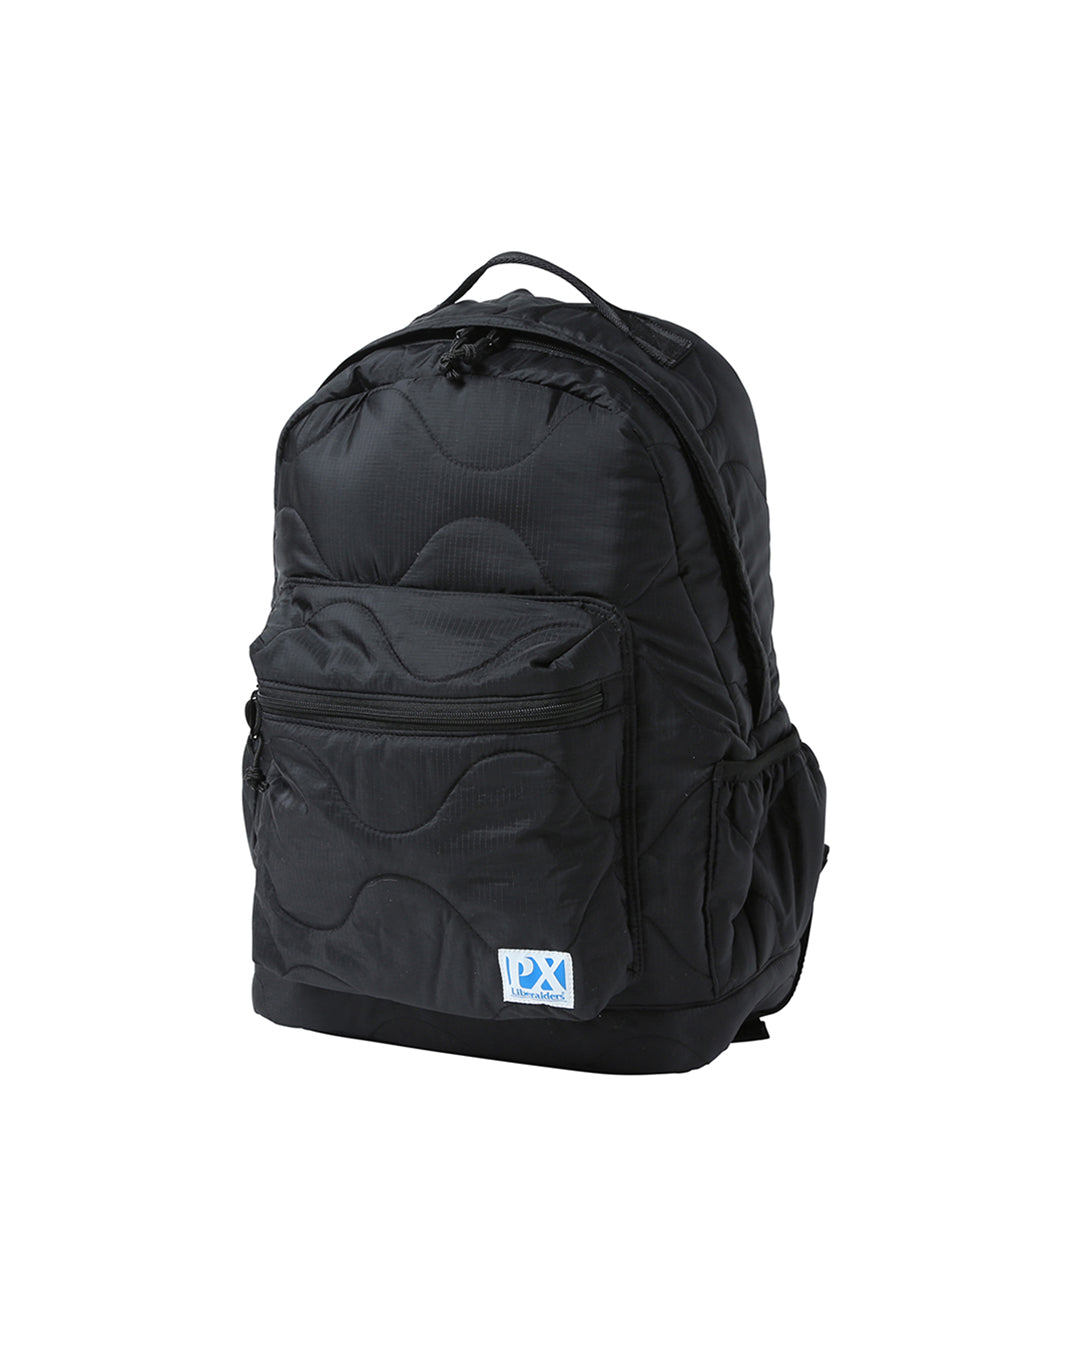 Liberaiders PX QUILTED DAYPACK